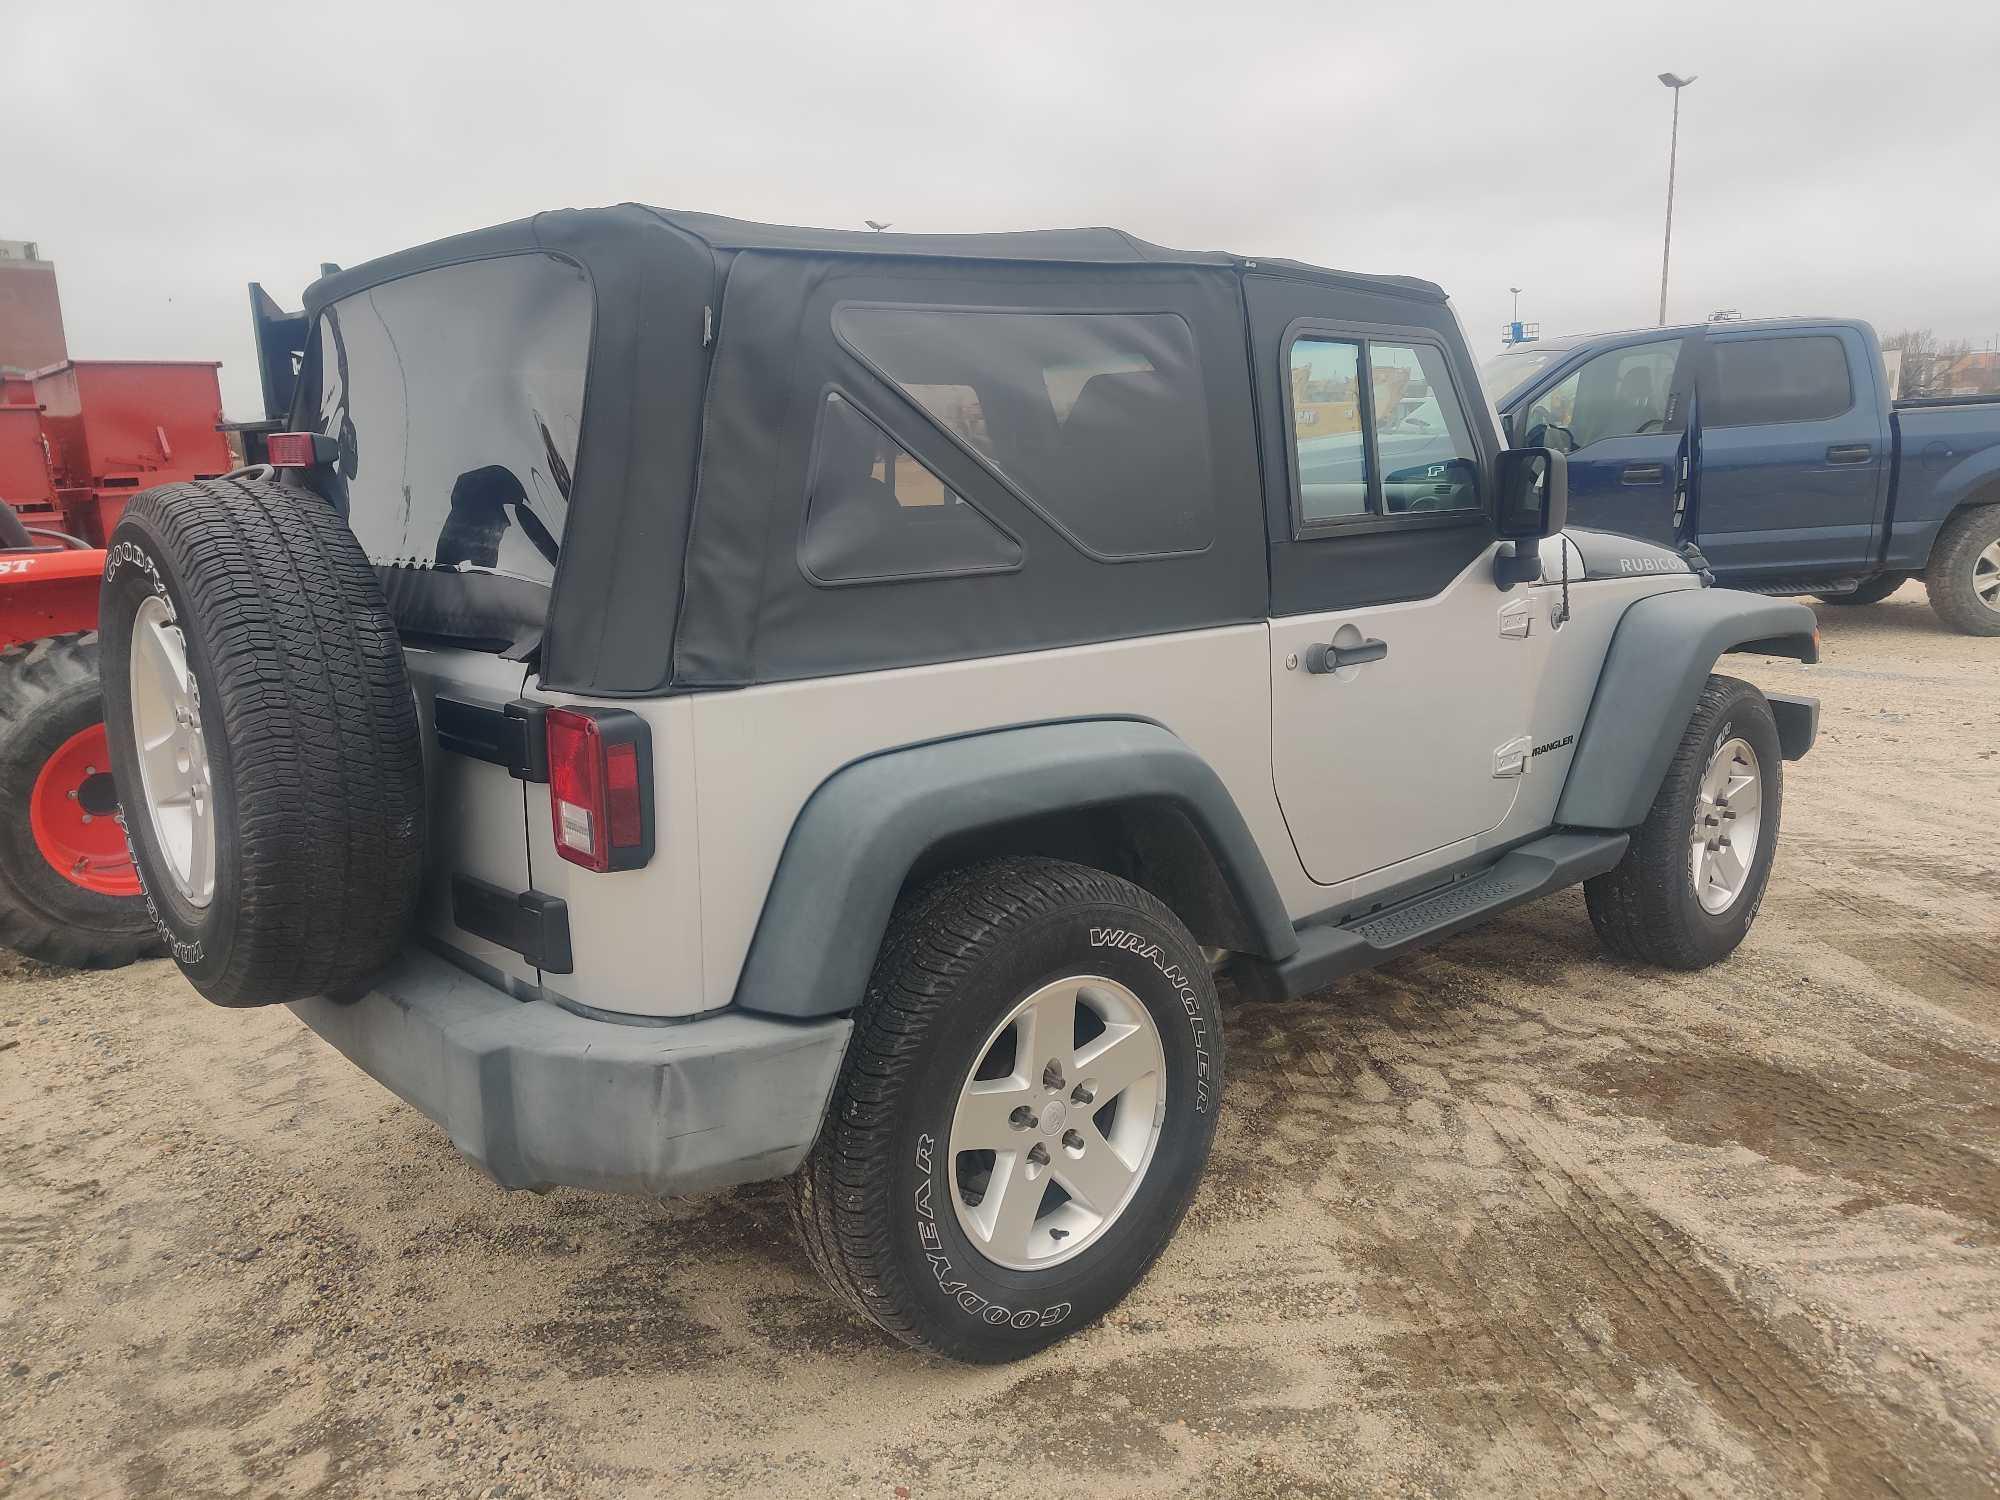 2007 JEEP WRANGLER SPORT UTILITY VEHICLE VN:1J8FA24147L227022 powered by gas engine.... SALVAGE TITL